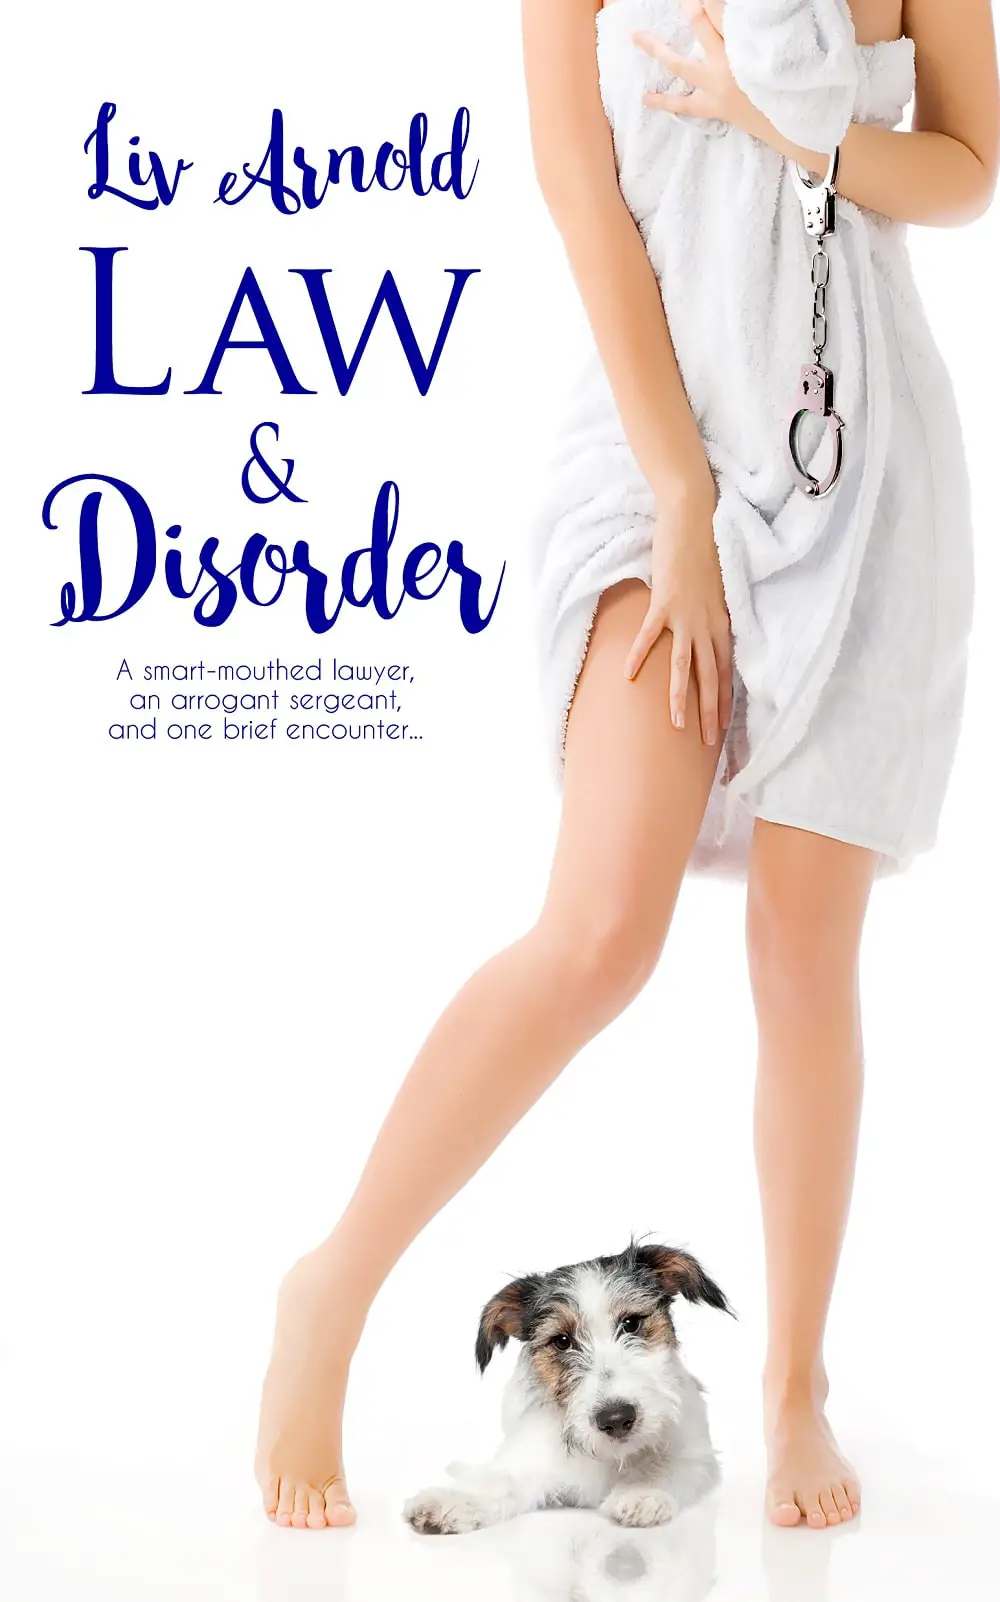 Law & Disorder book